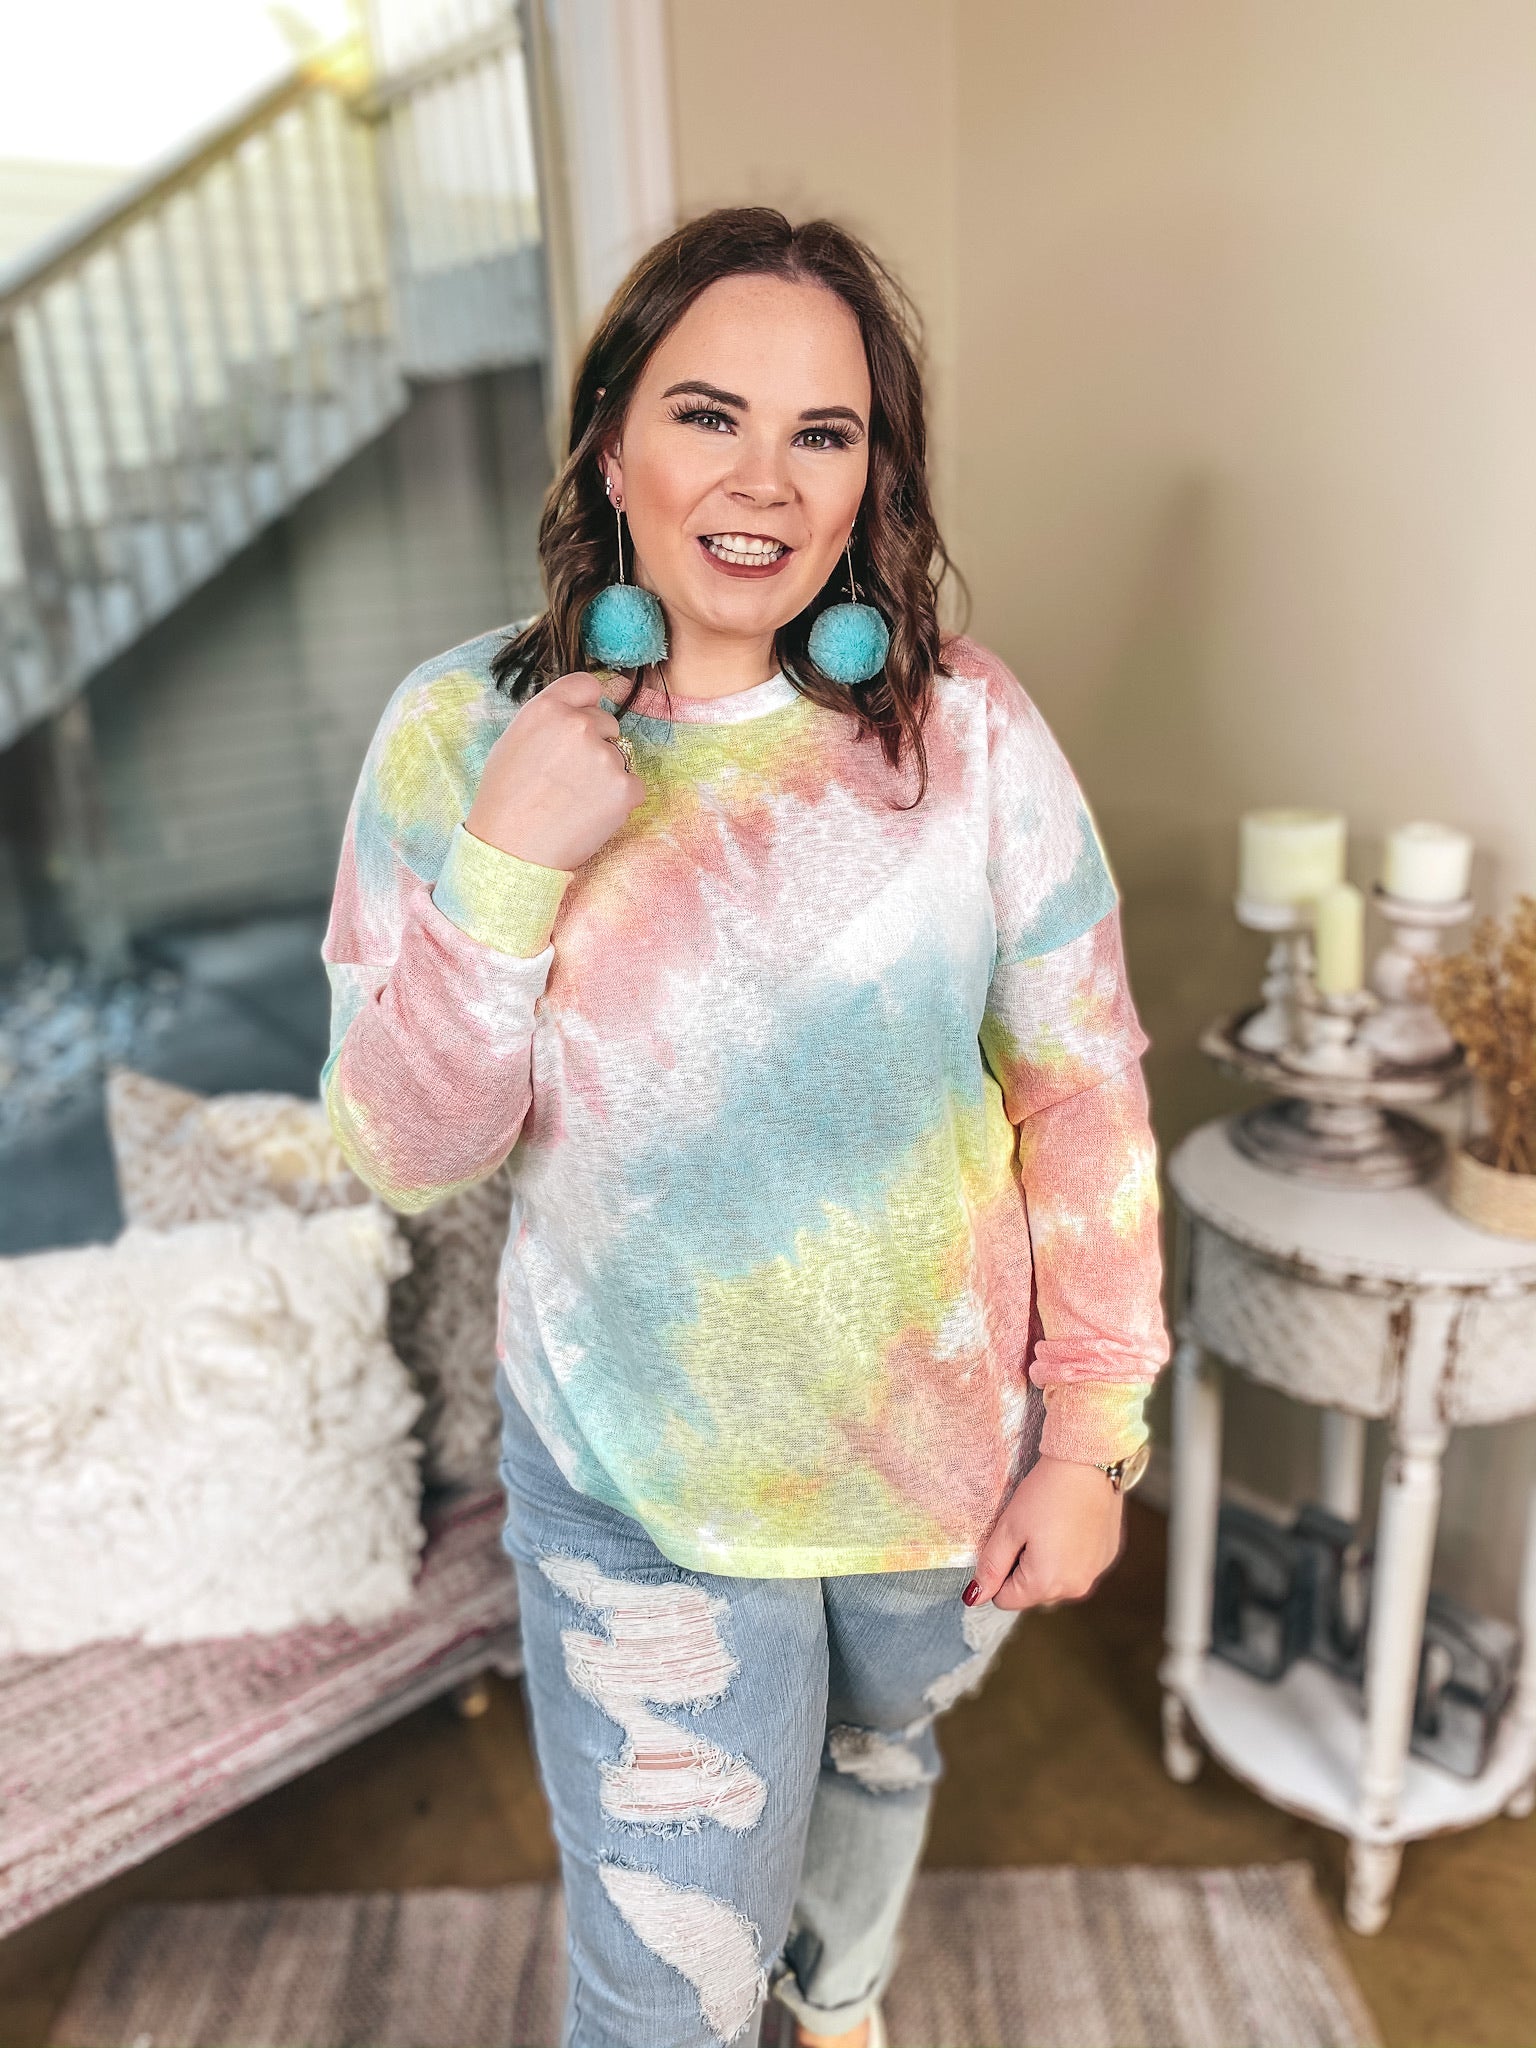 Last Chance Size S/M & M/L | Lighten Up Tie Dye Long Sleeve Top in Mint and Coral - Giddy Up Glamour Boutique